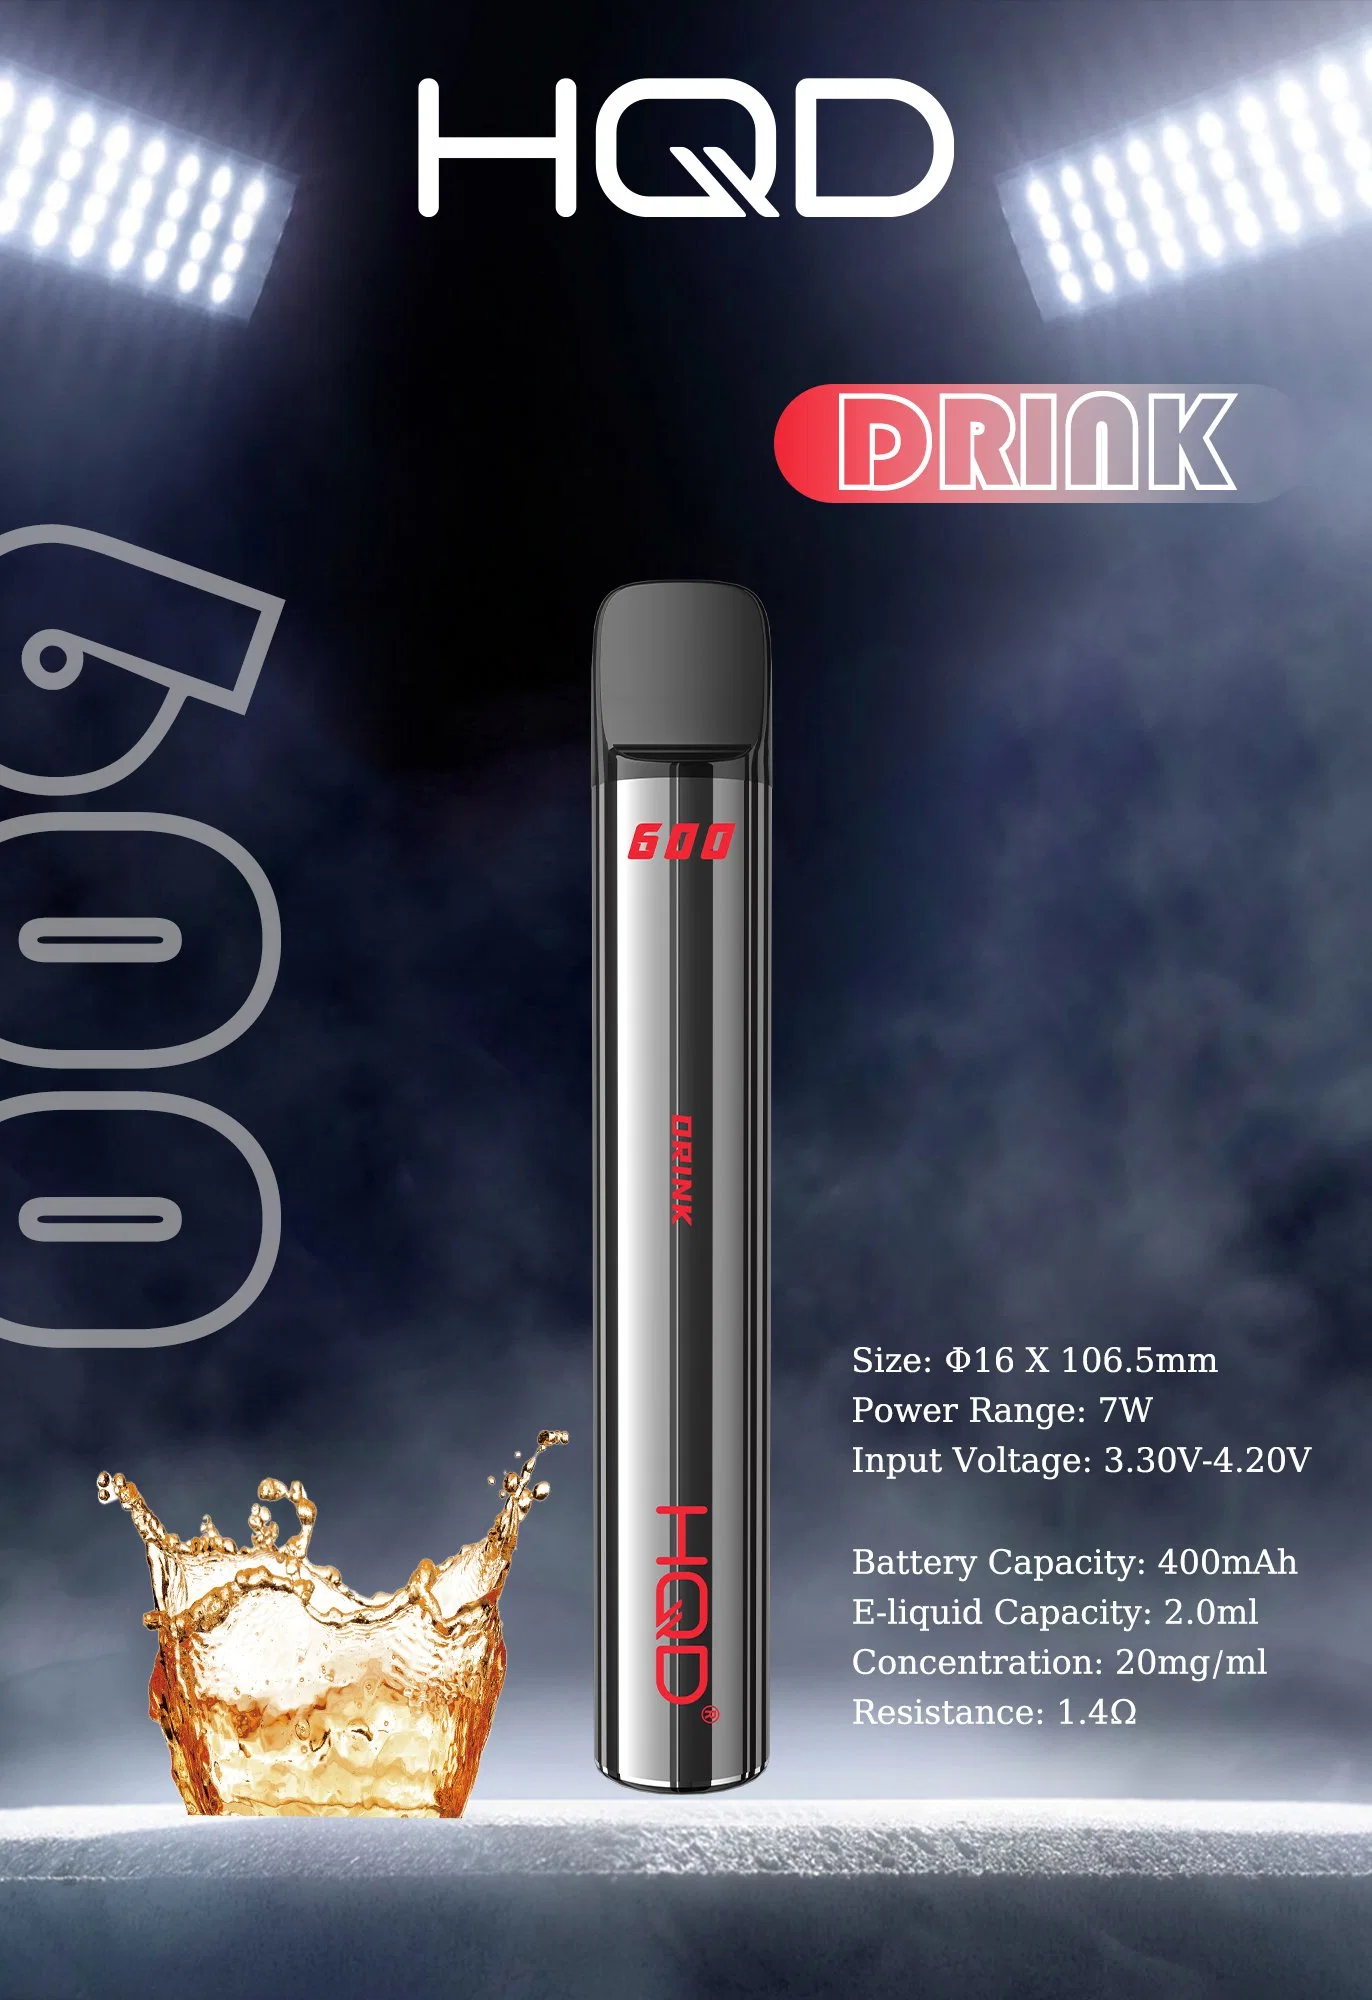 2023 New Arrival Hqd 600puffs Vape Disposable/Chargeable From Hqd in 1688 Alibaba OEM/ODM Available